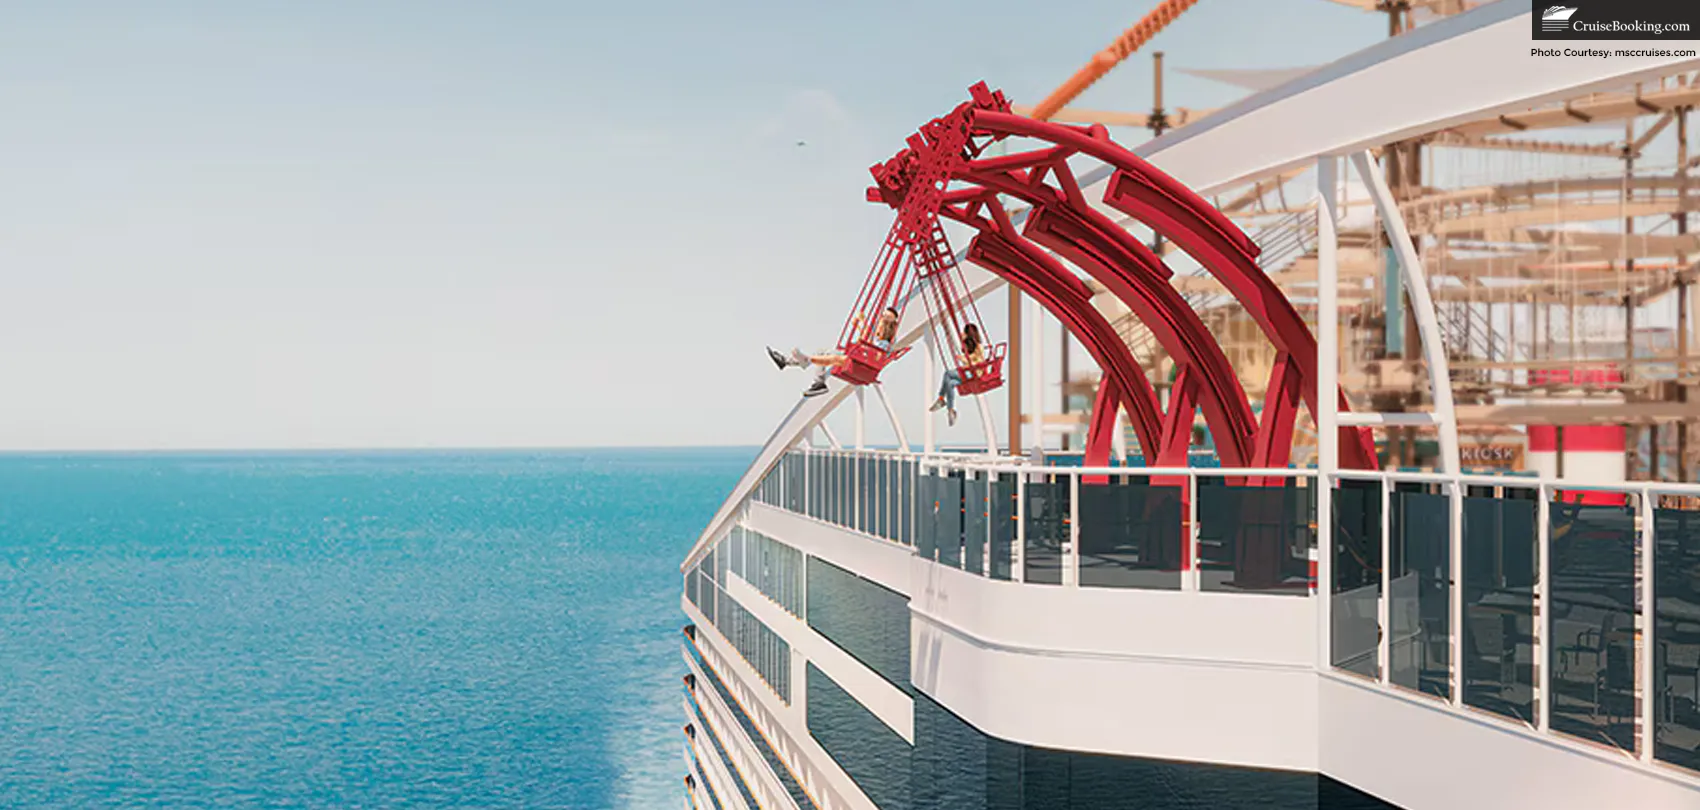 MSC World America’s Exclusive Over-Water Swing Ride at Sea